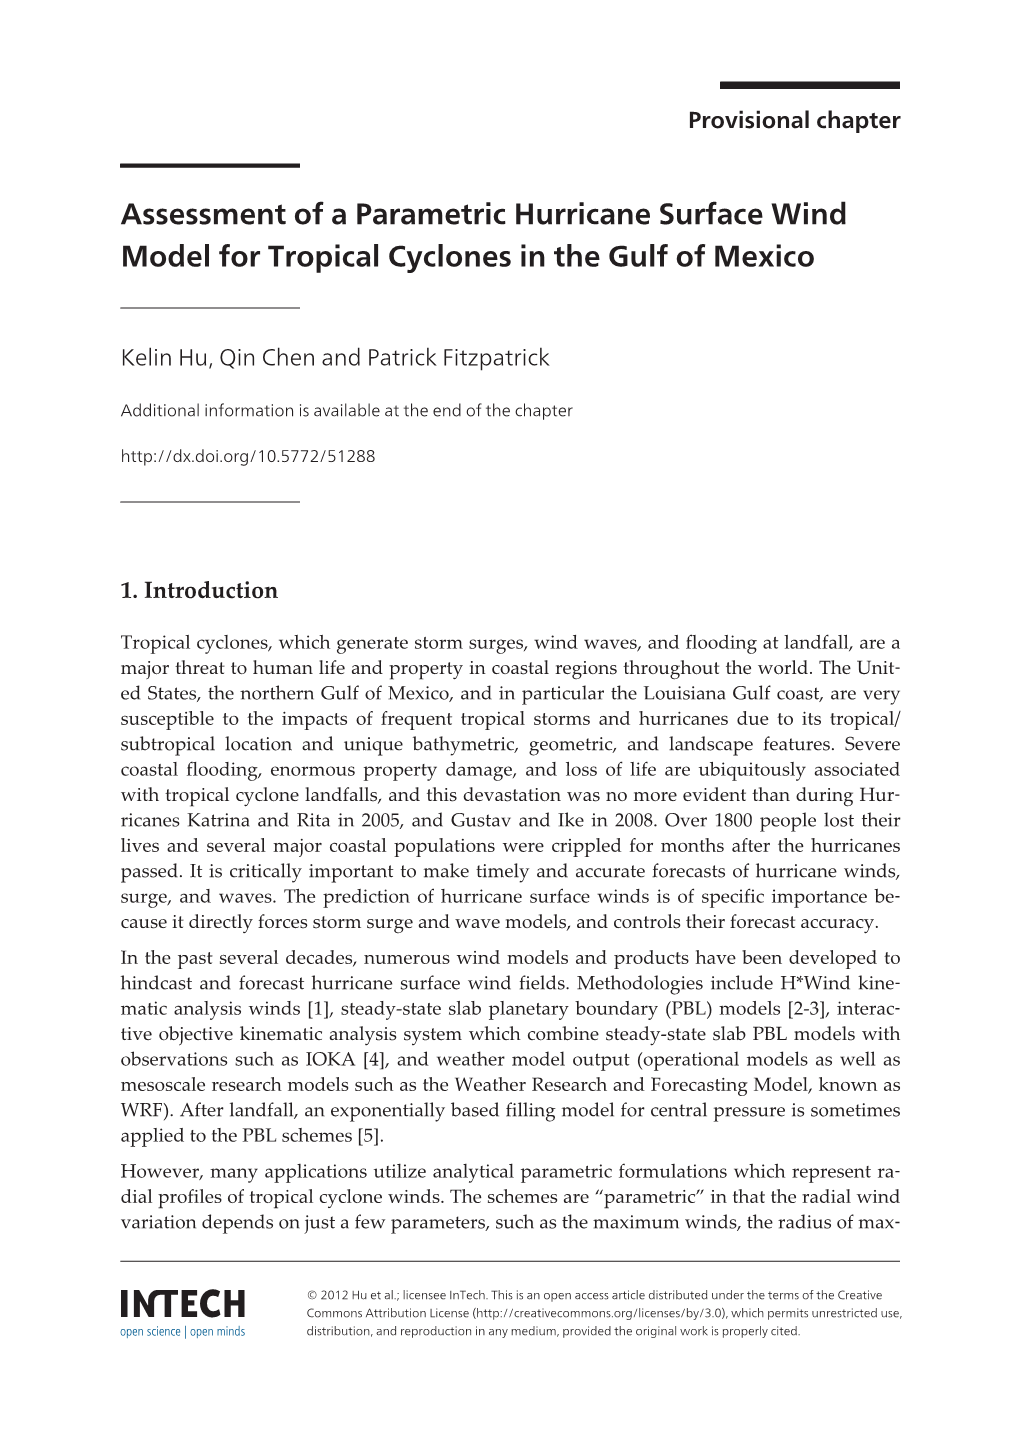 Assessment of a Parametric Hurricane Surface Wind Model for Tropical Cyclones in the Gulf of Mexico